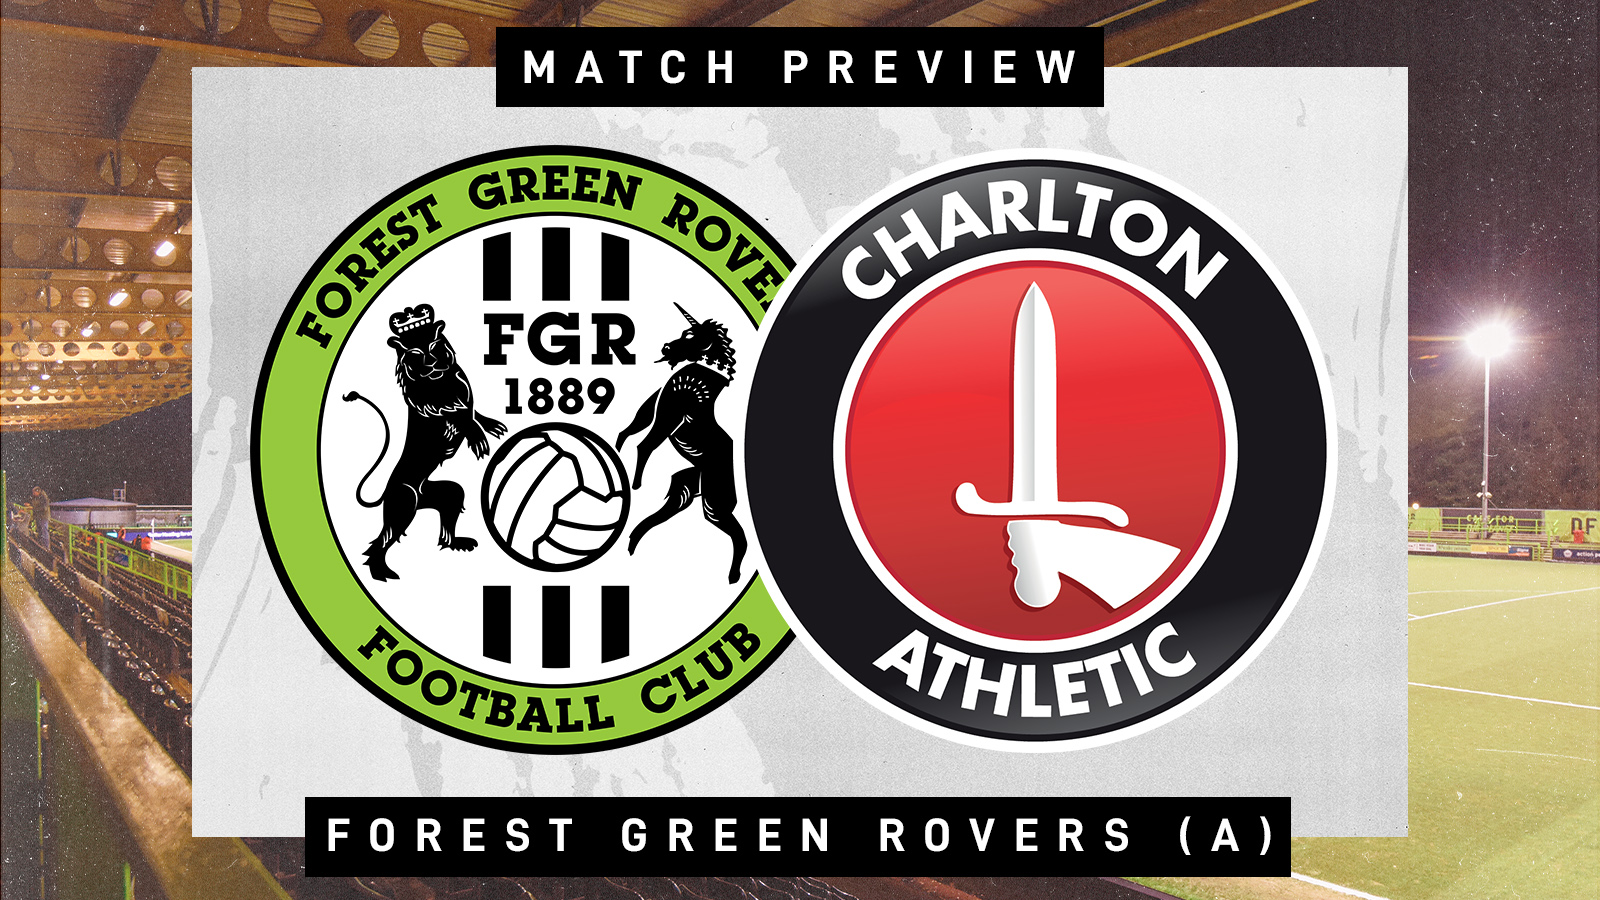 FGR MATCH PREVIEW